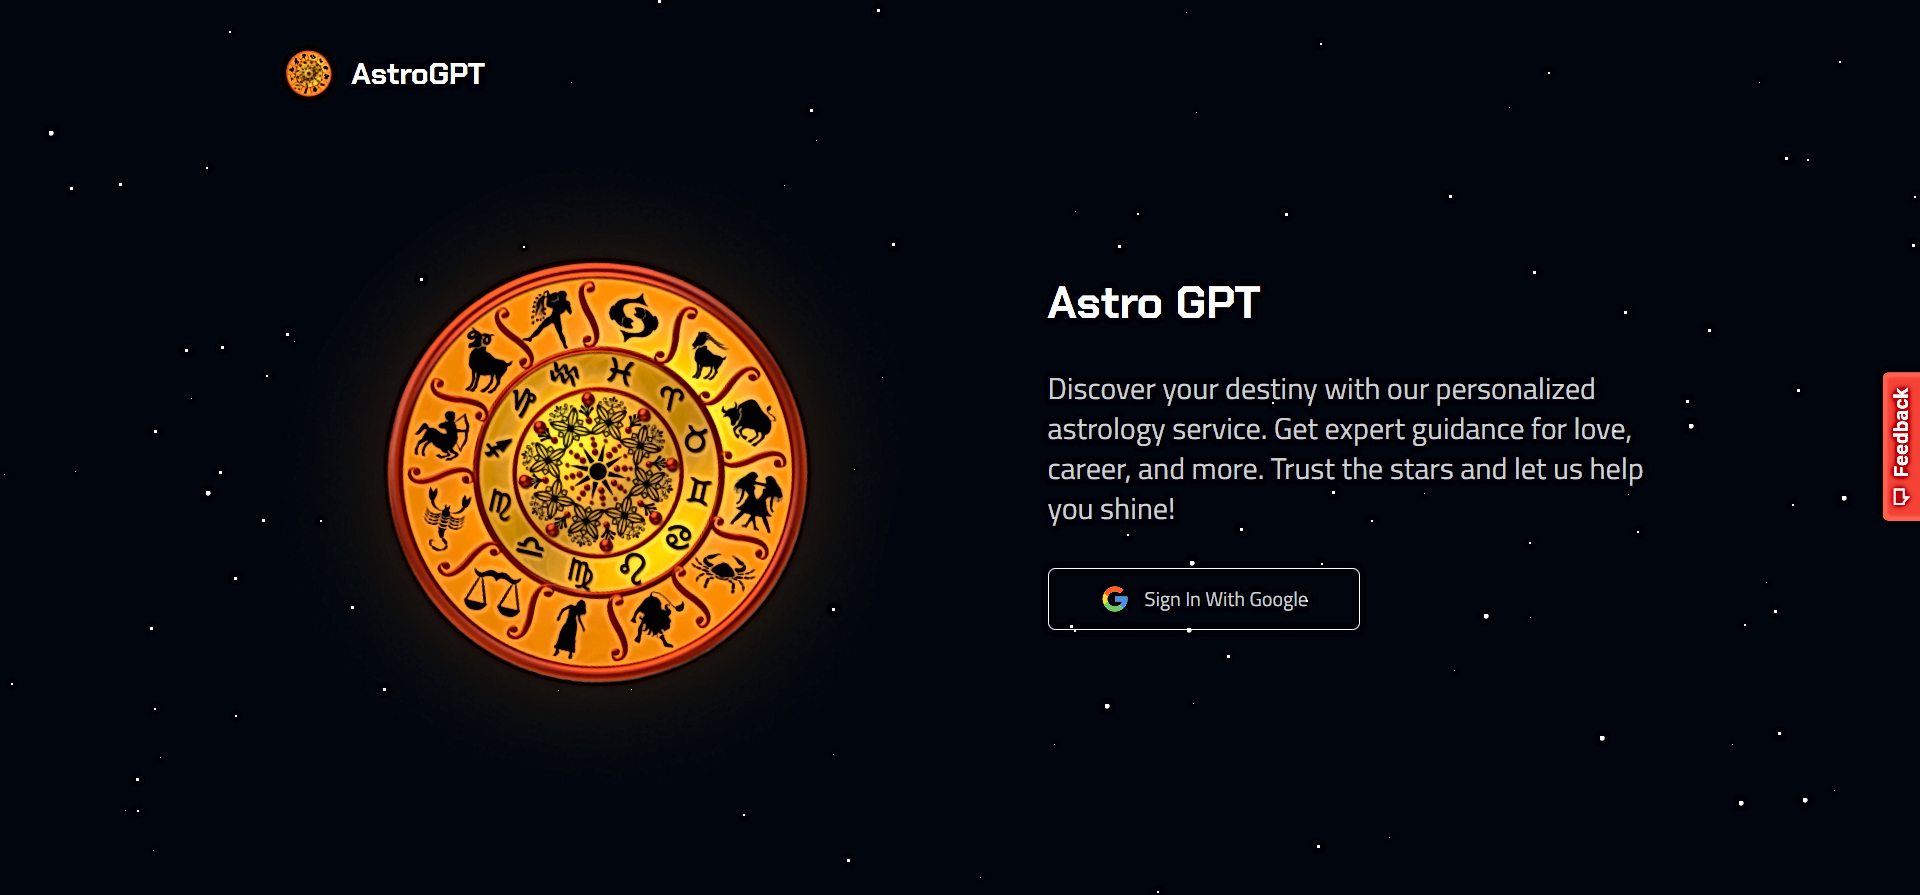 AstroGPT featured